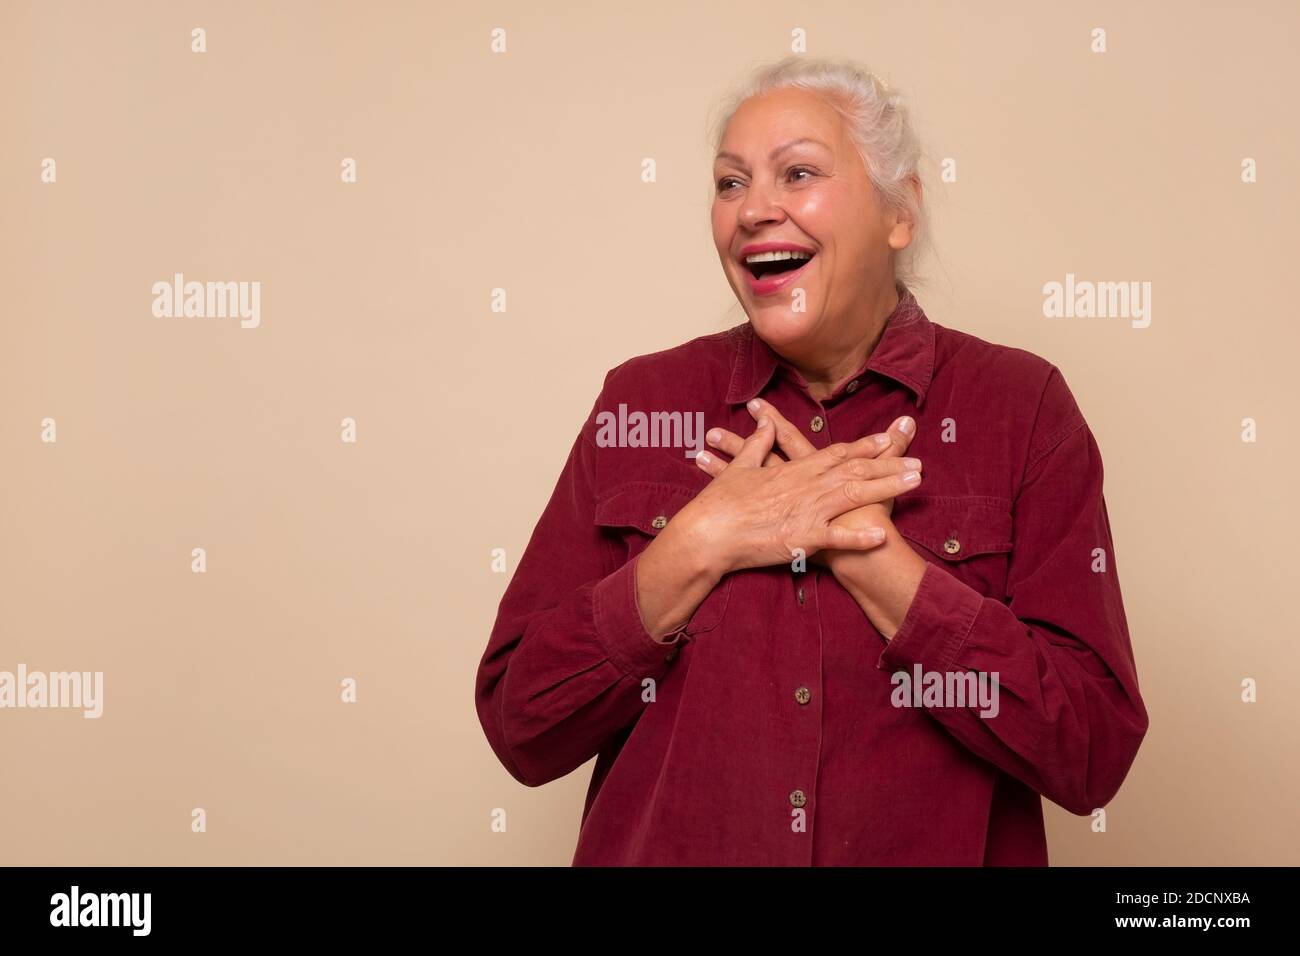 Old hispanic woman with surprised expression on her face Stock Photo